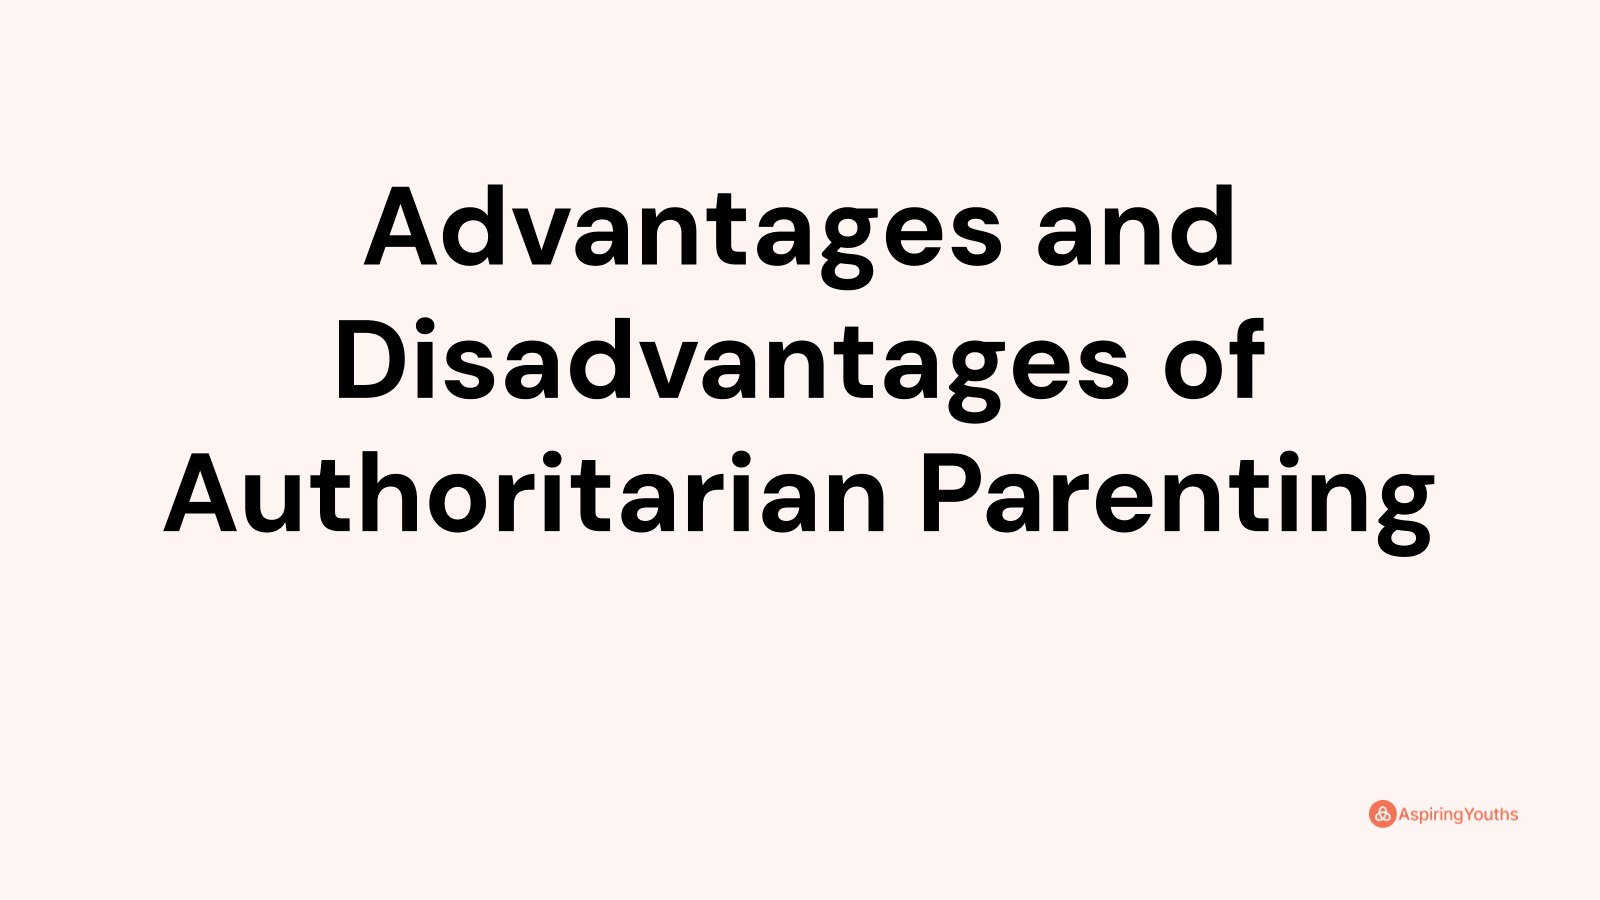 Advantages and disadvantages of Authoritarian Parenting